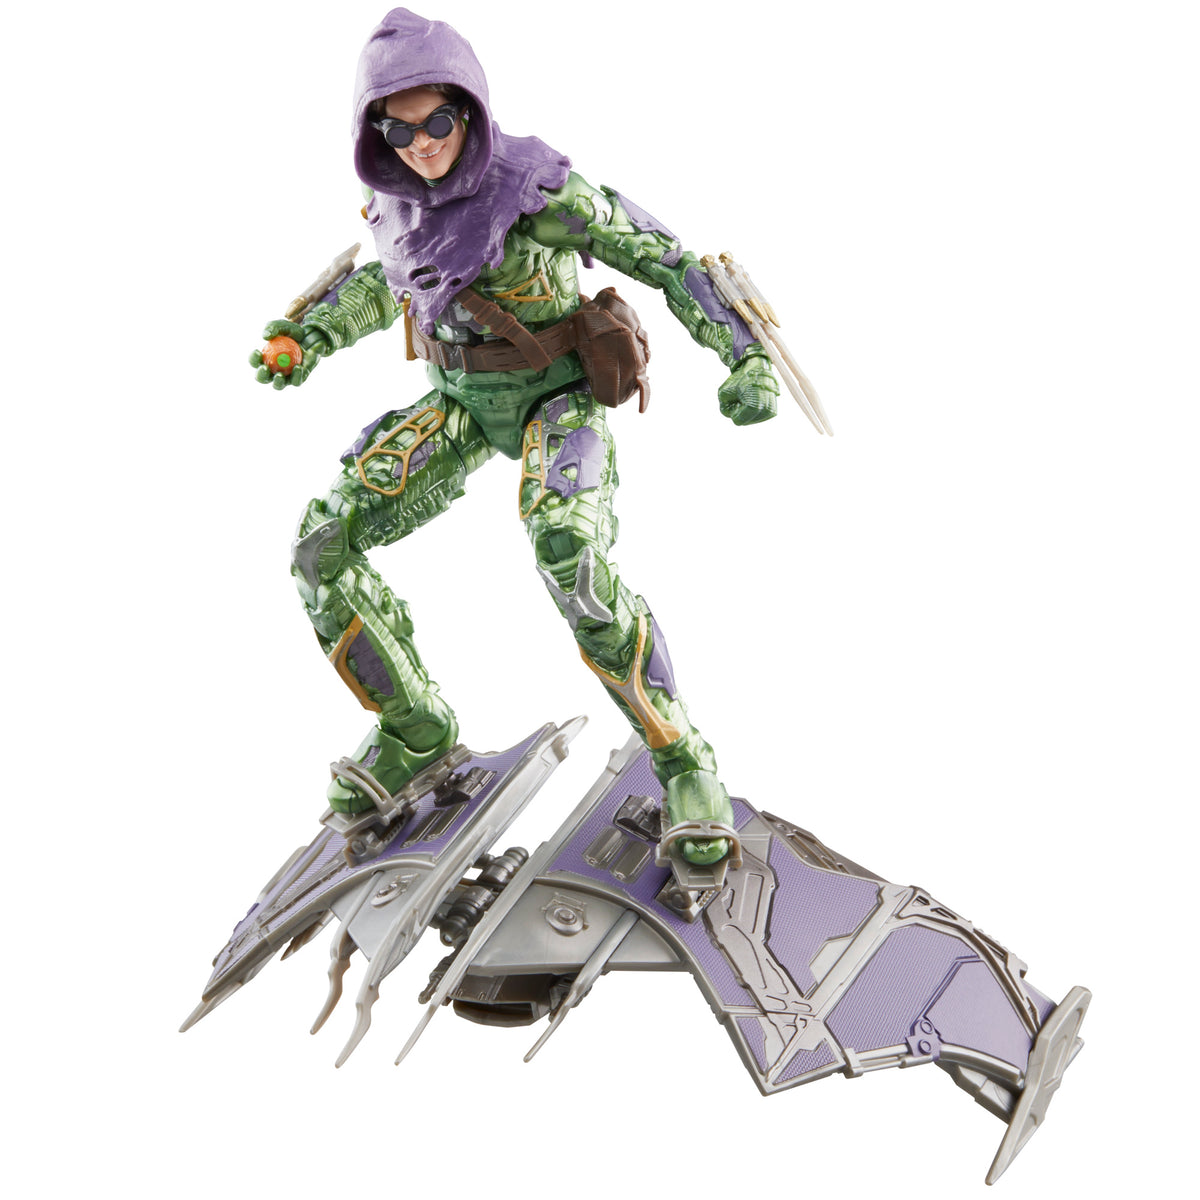 I hope that if the Green Goblin ever comes to the MCU it has a